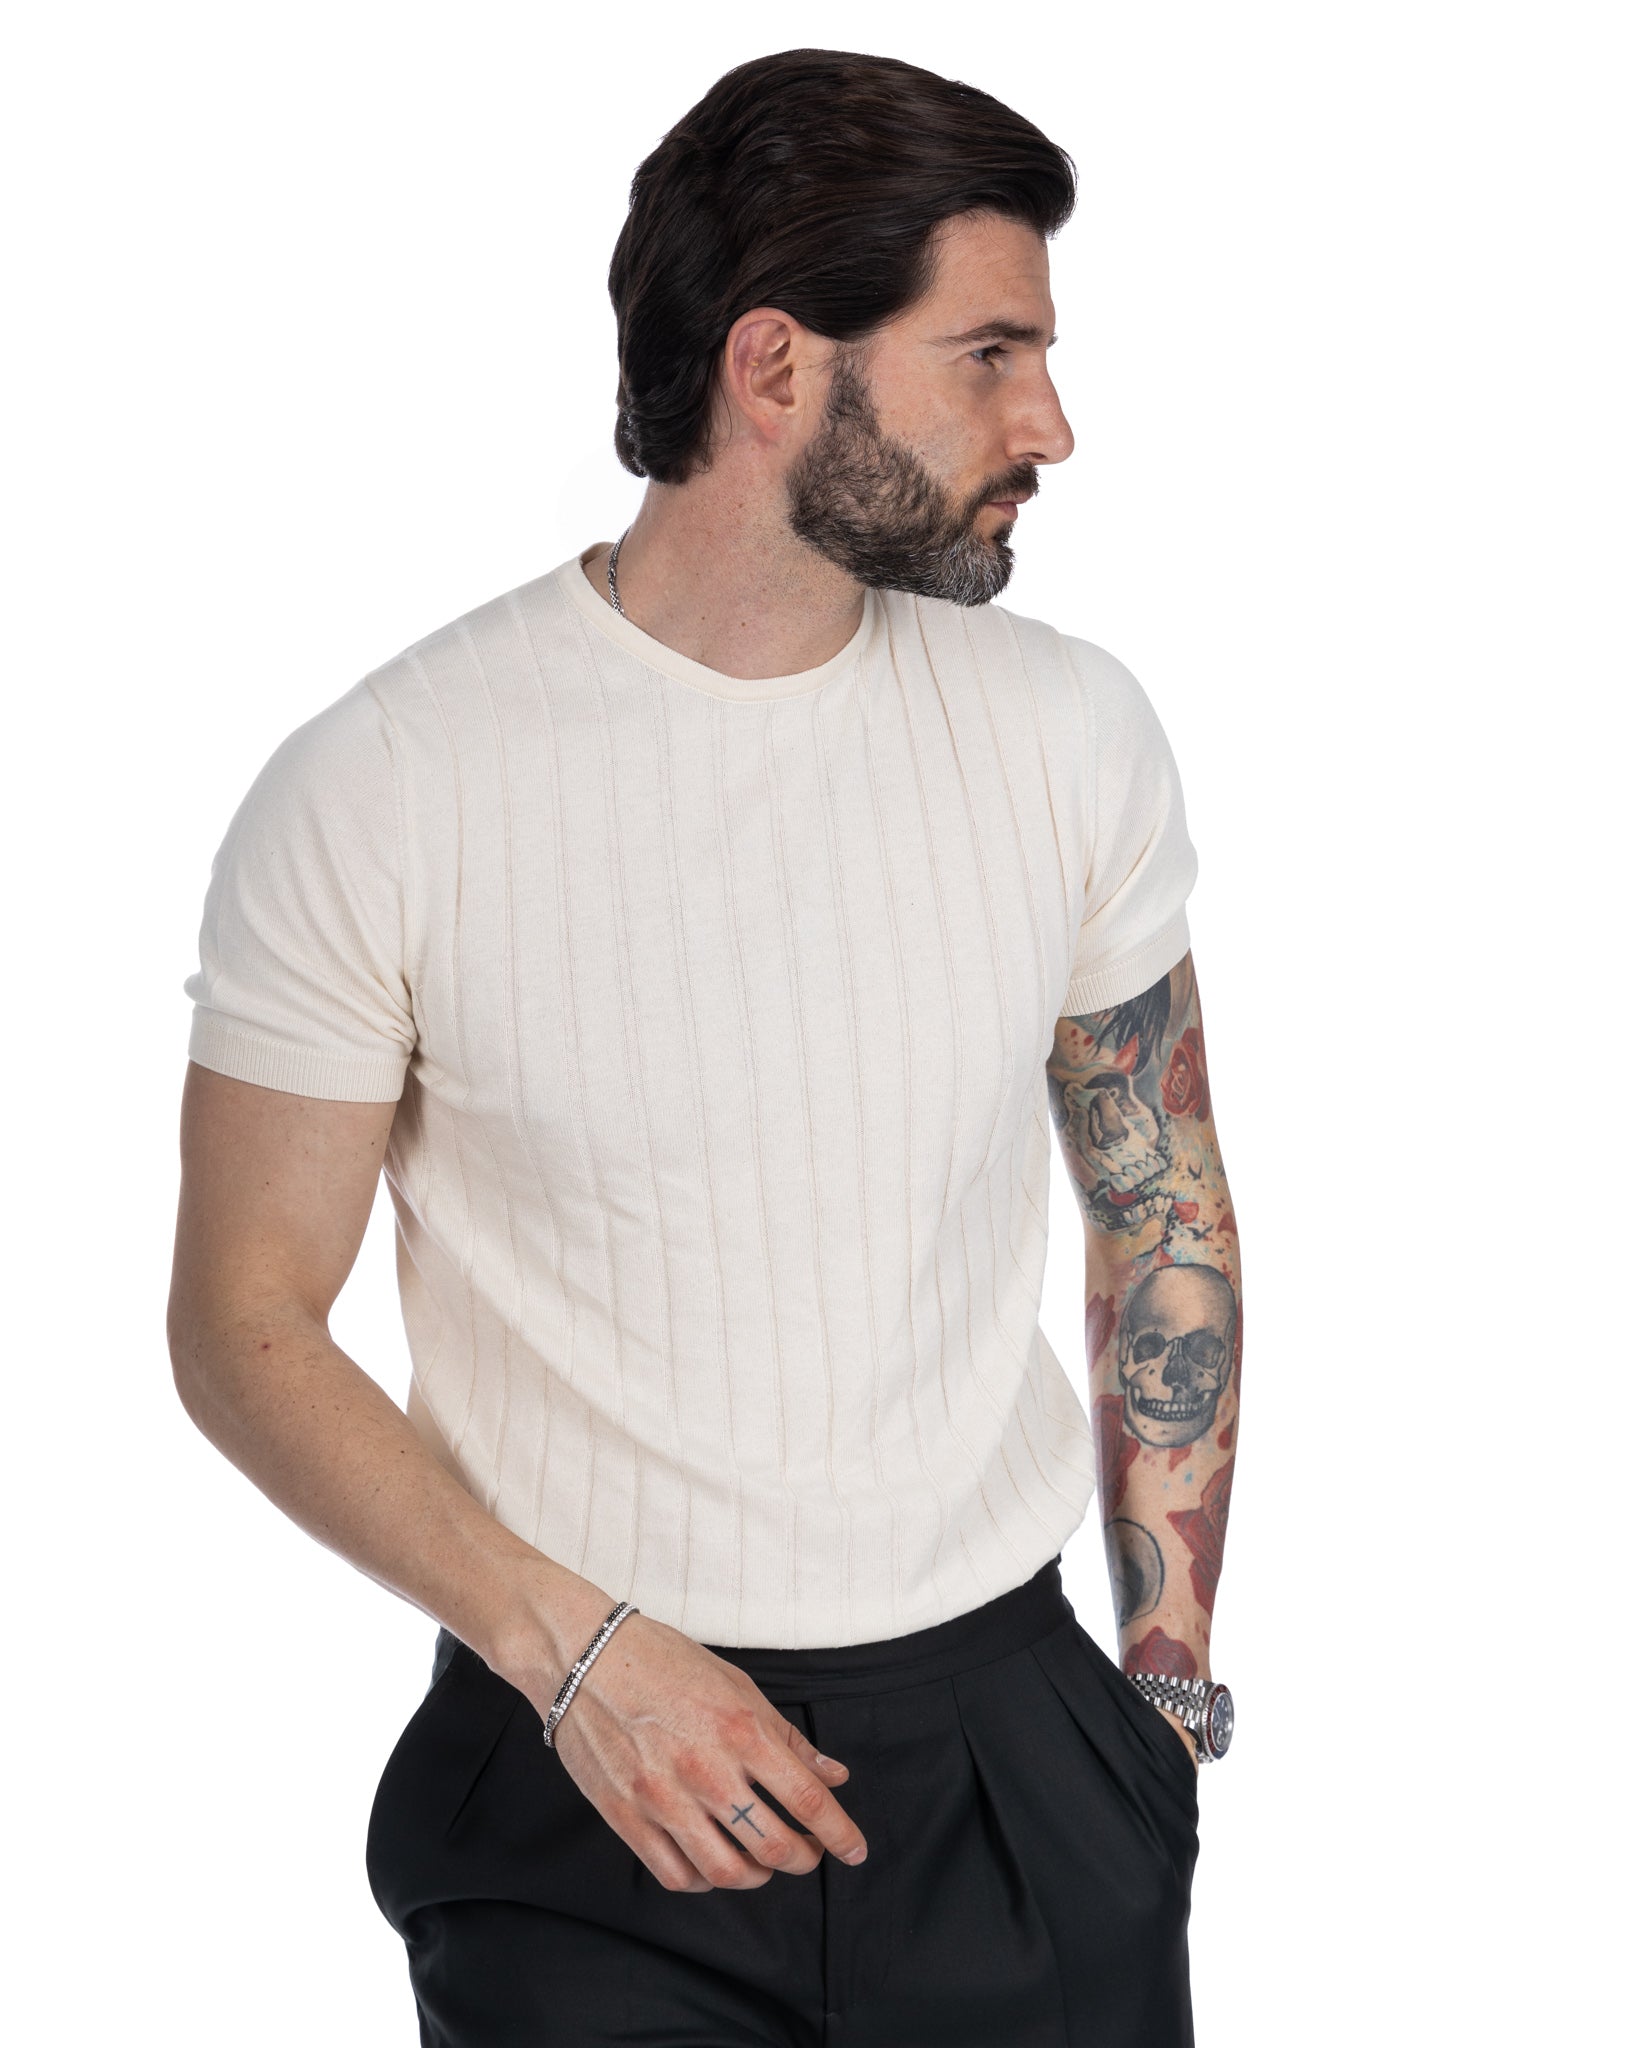 Andreas - t-shirt panna a coste in maglia